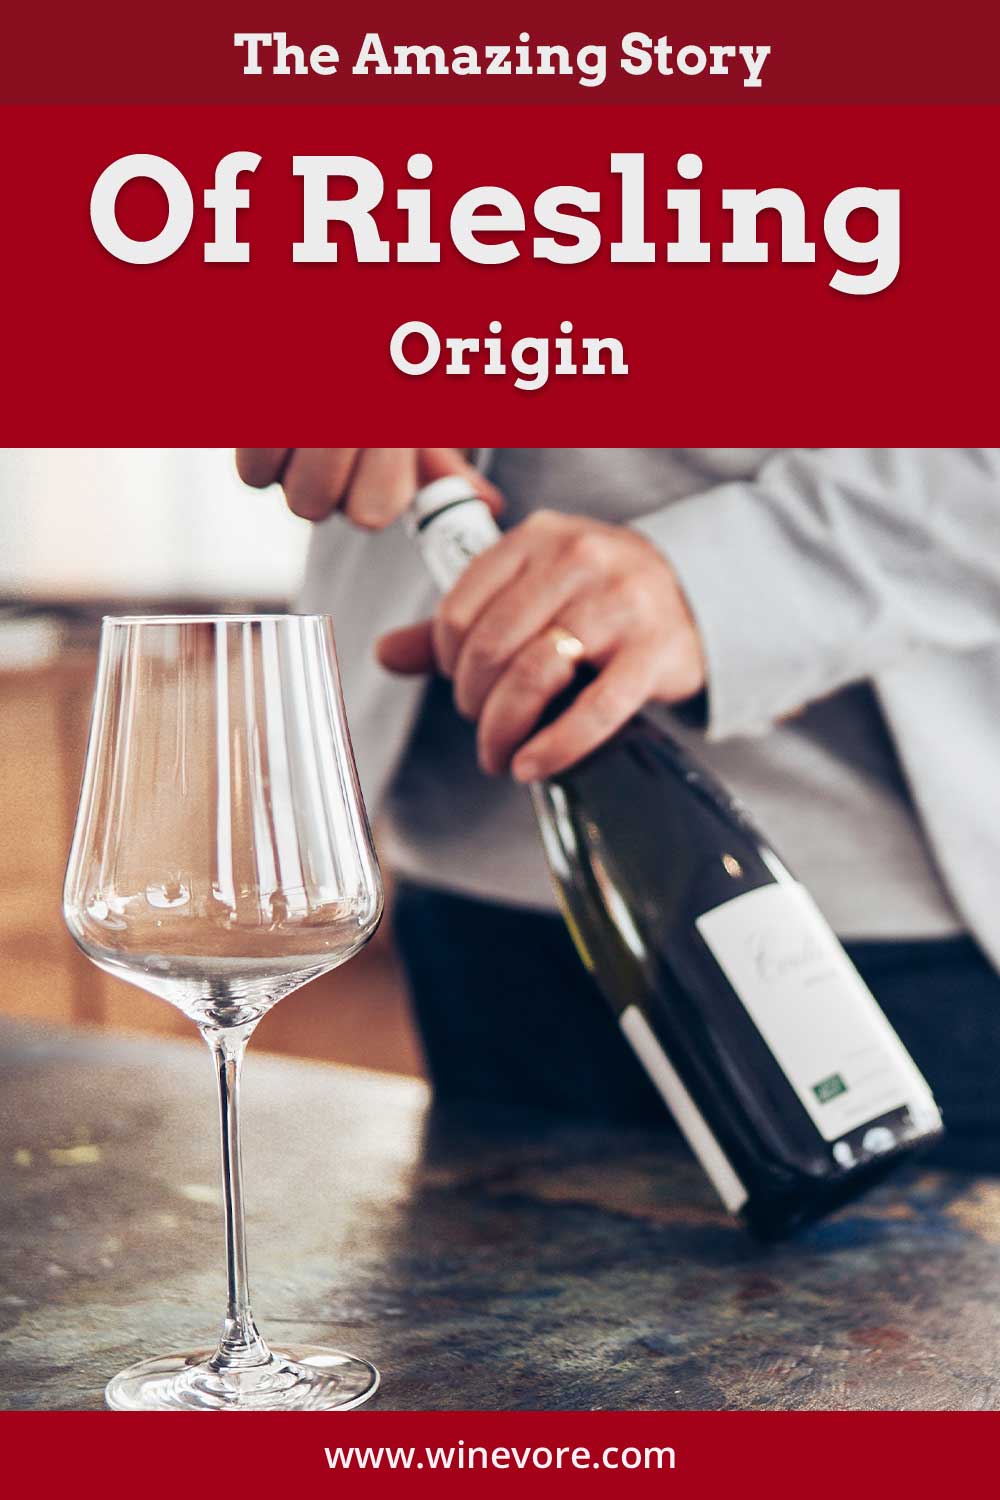 Man opening a wine bottle with a wine glass in front of him - Riesling Origin.